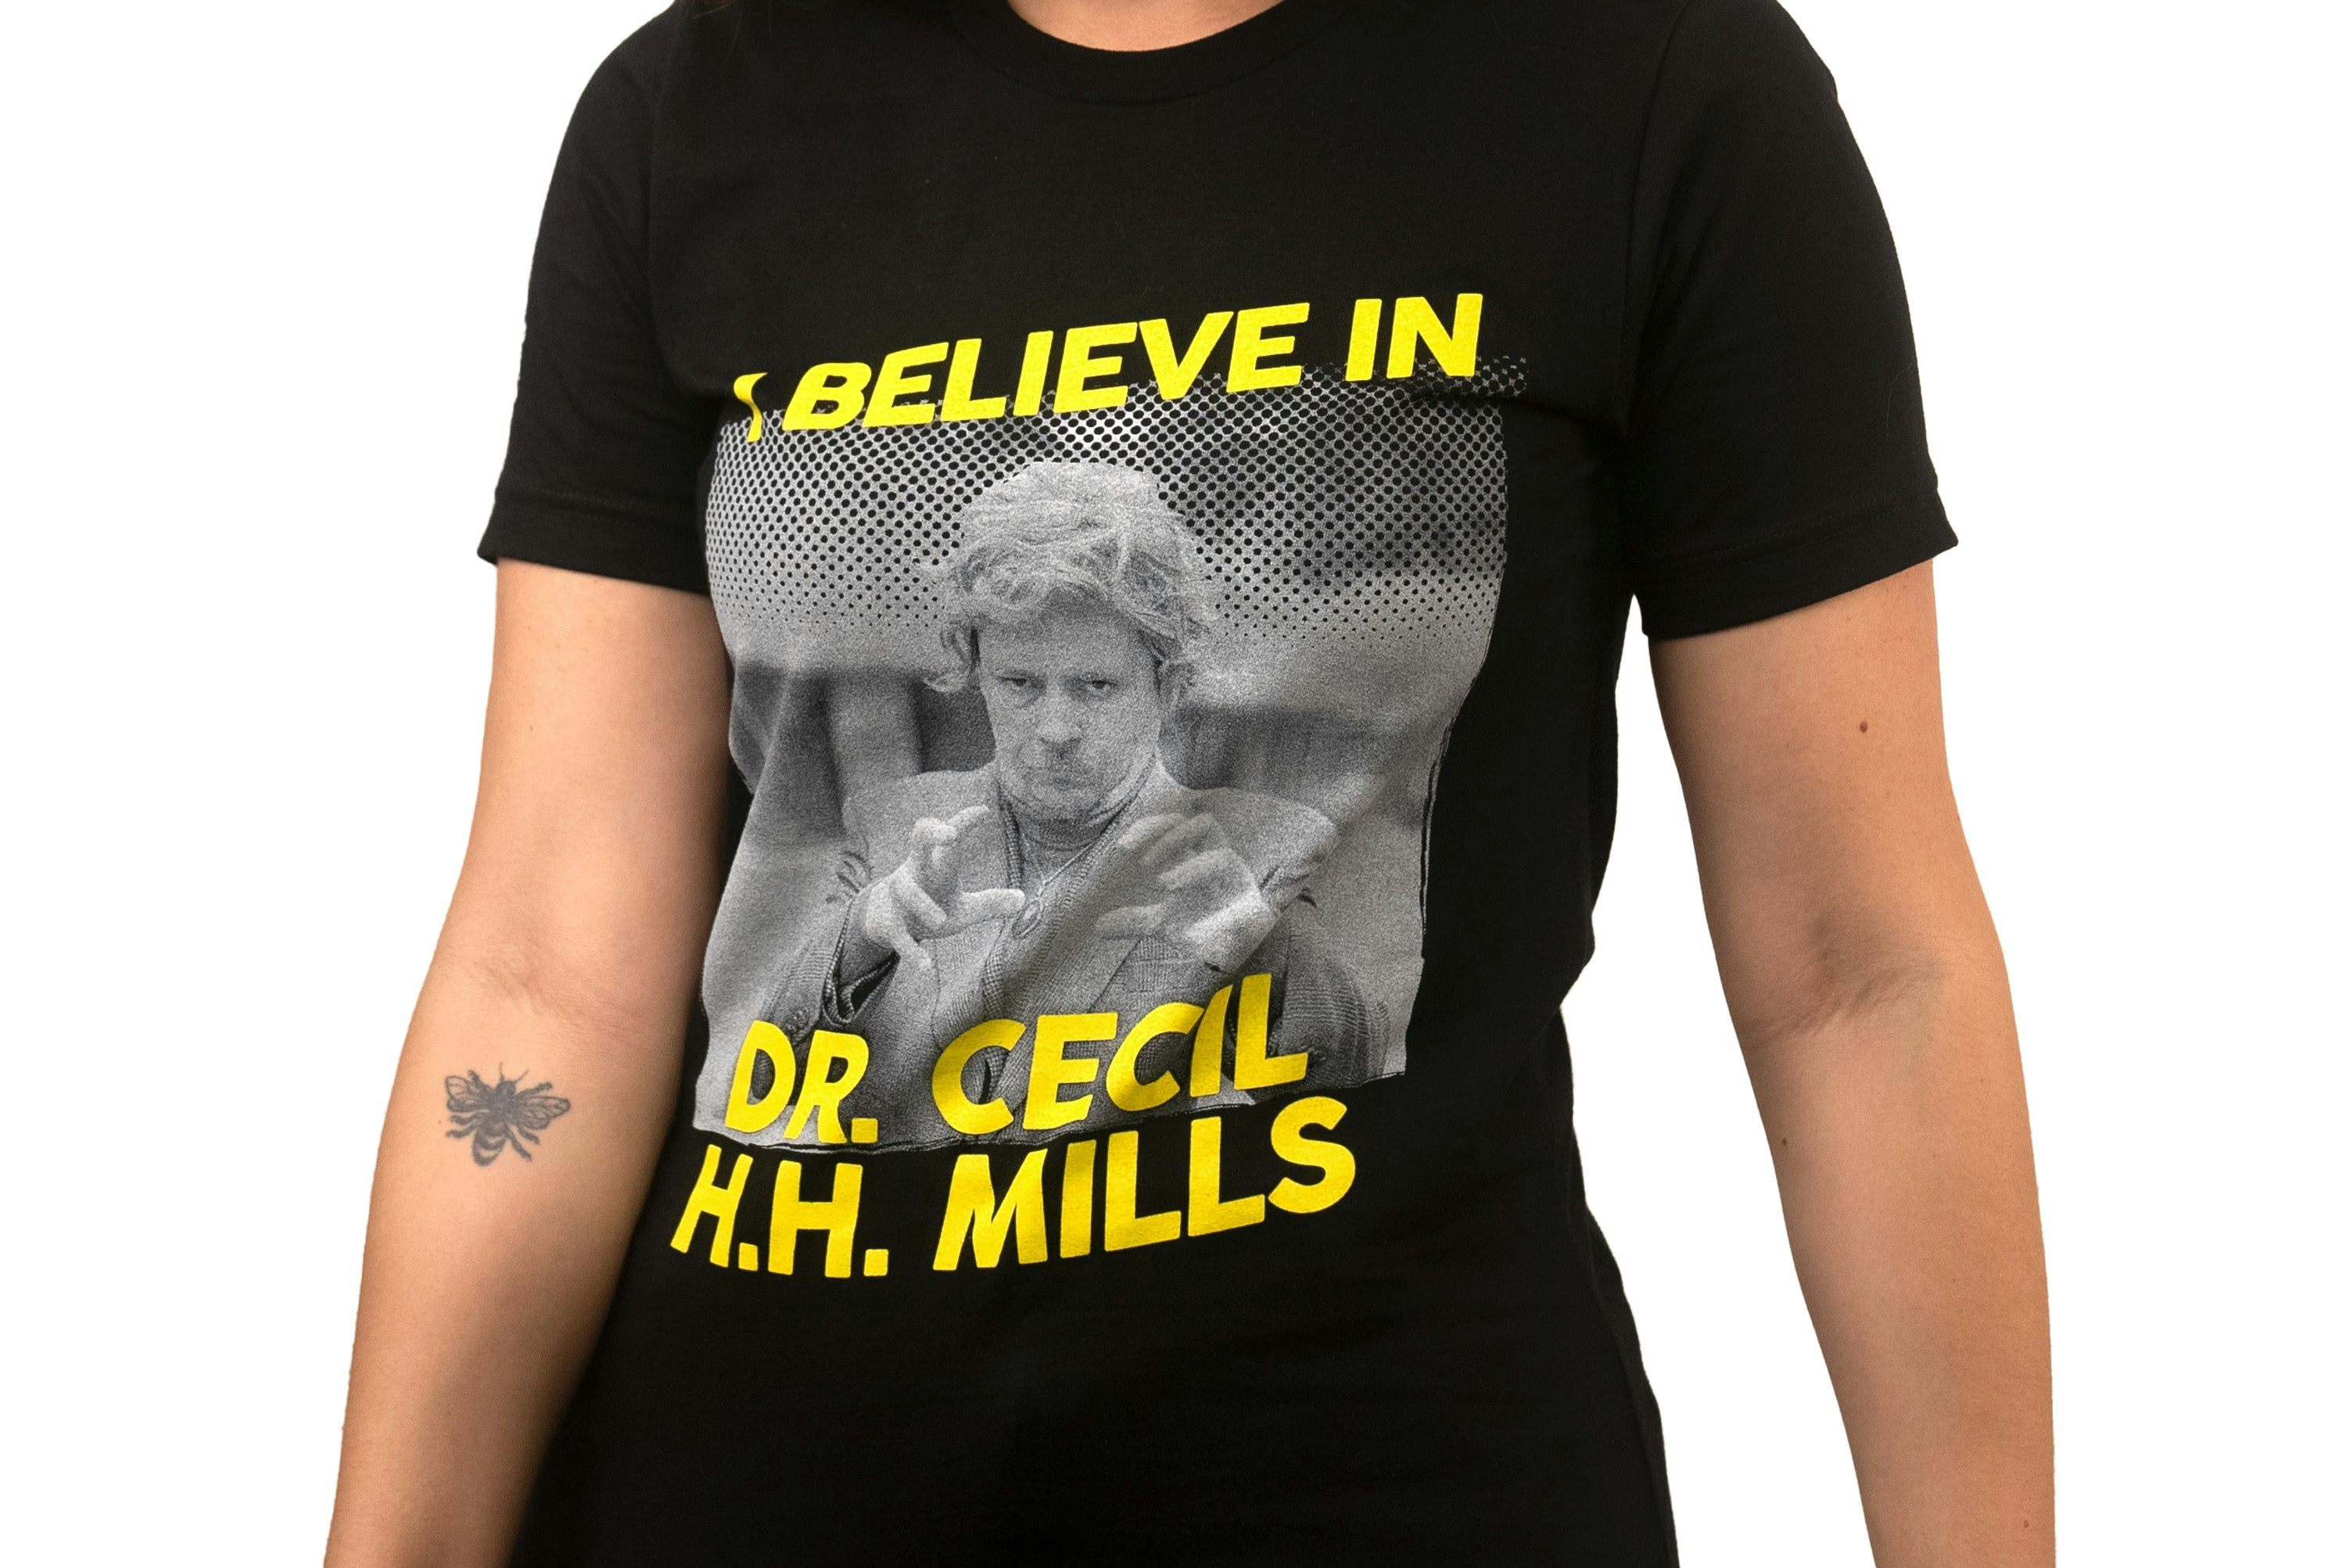 Ghost Hunters Adventure Club - "I Believe In Dr. Cecil H. H. Mills" 1ˢᵗ Edition Unisex T-Shirt